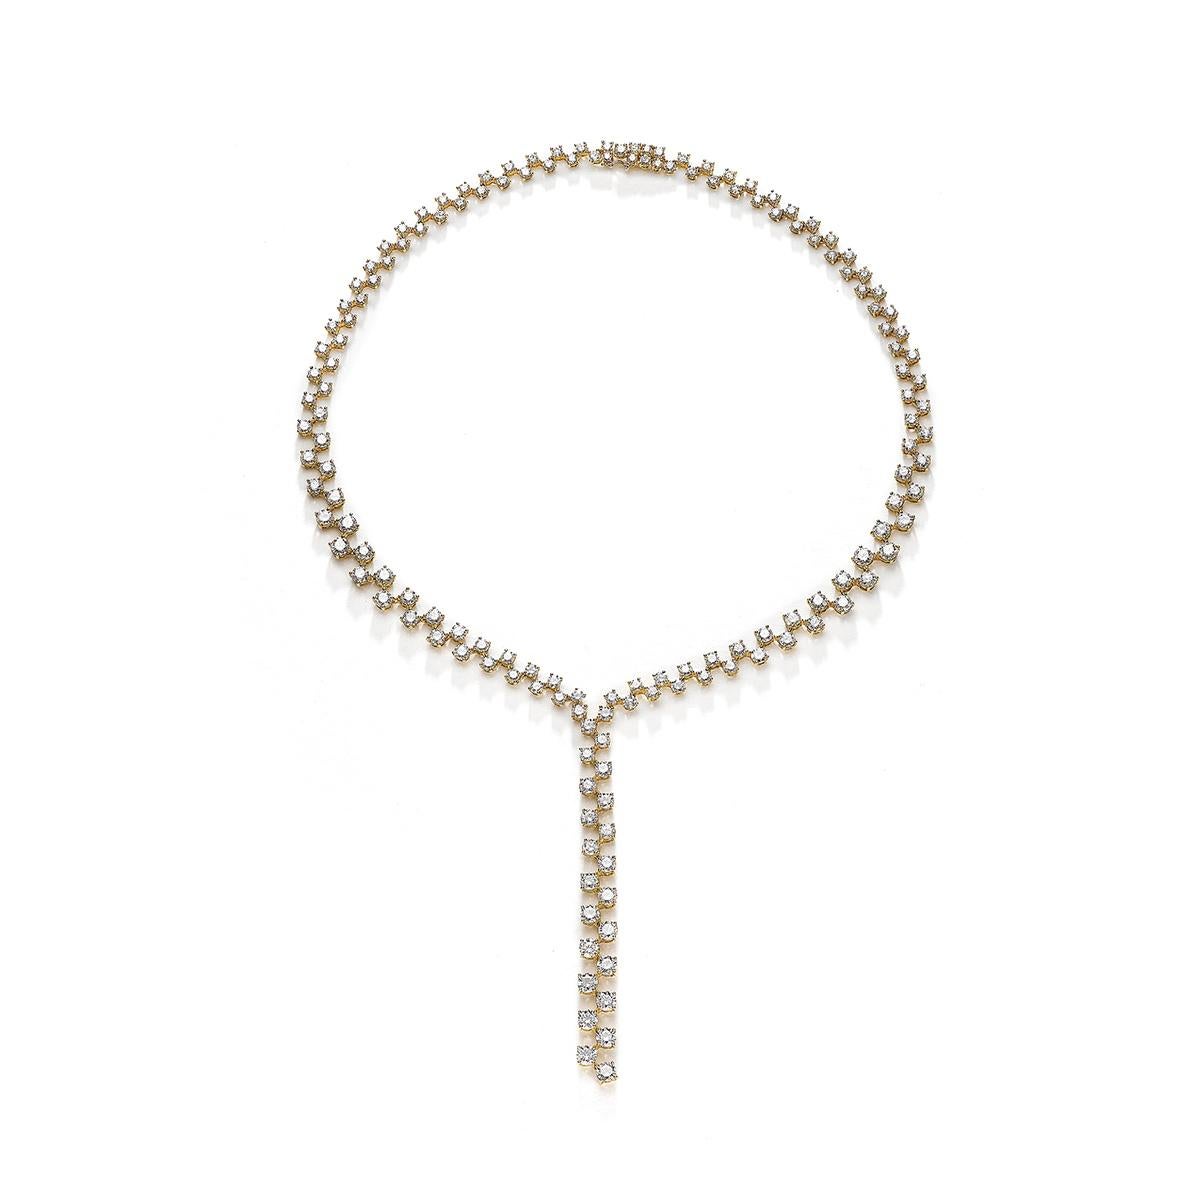 Necklace in 18kt yellow gold set with 161 diamonds 22.23 cts